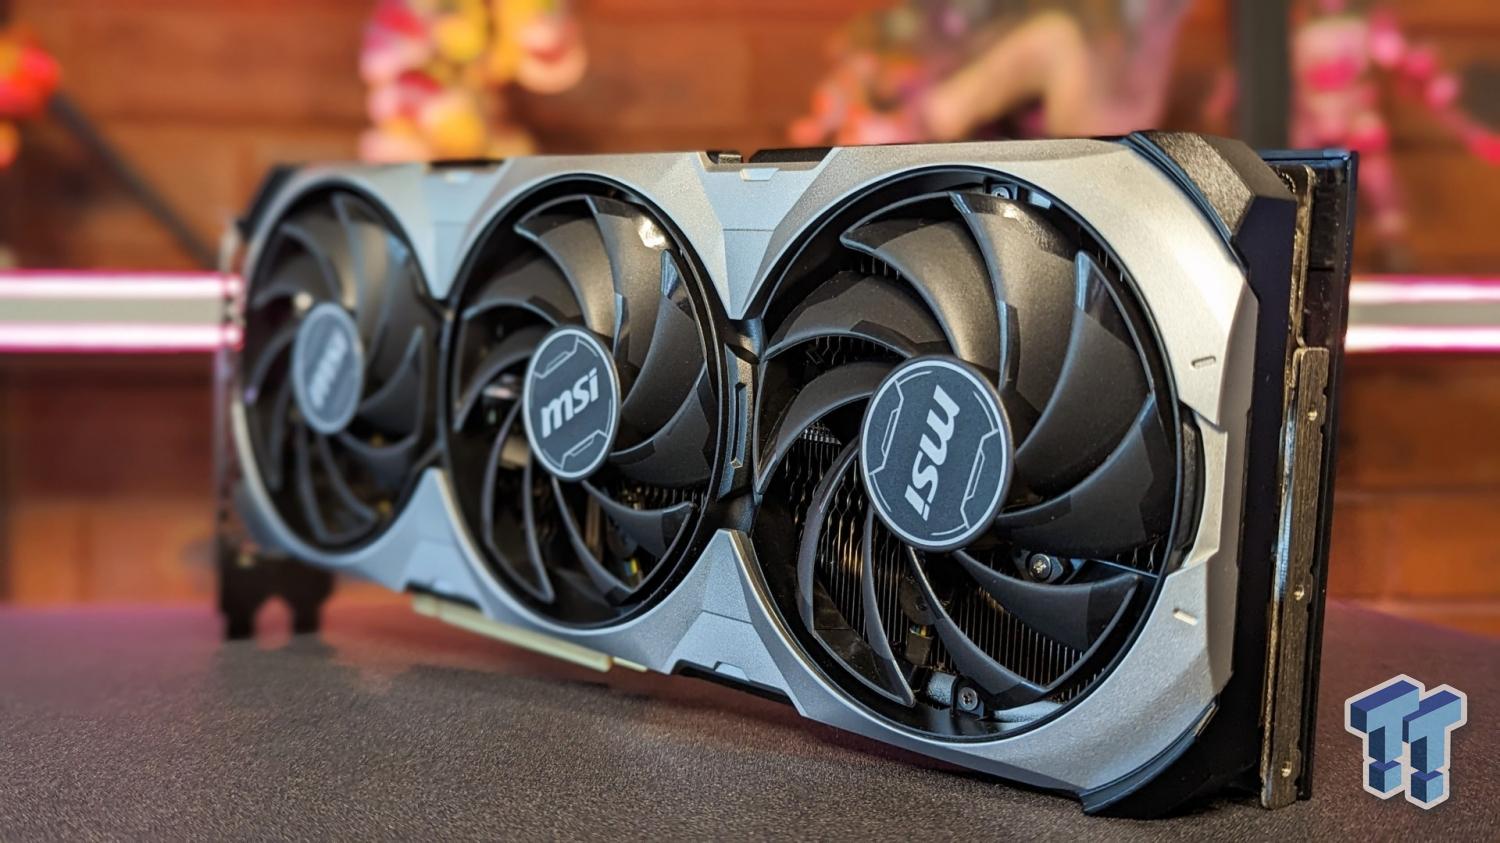 GeForce RTX 4070 Graphics Card Review - Featuring MSI Ventus 3X